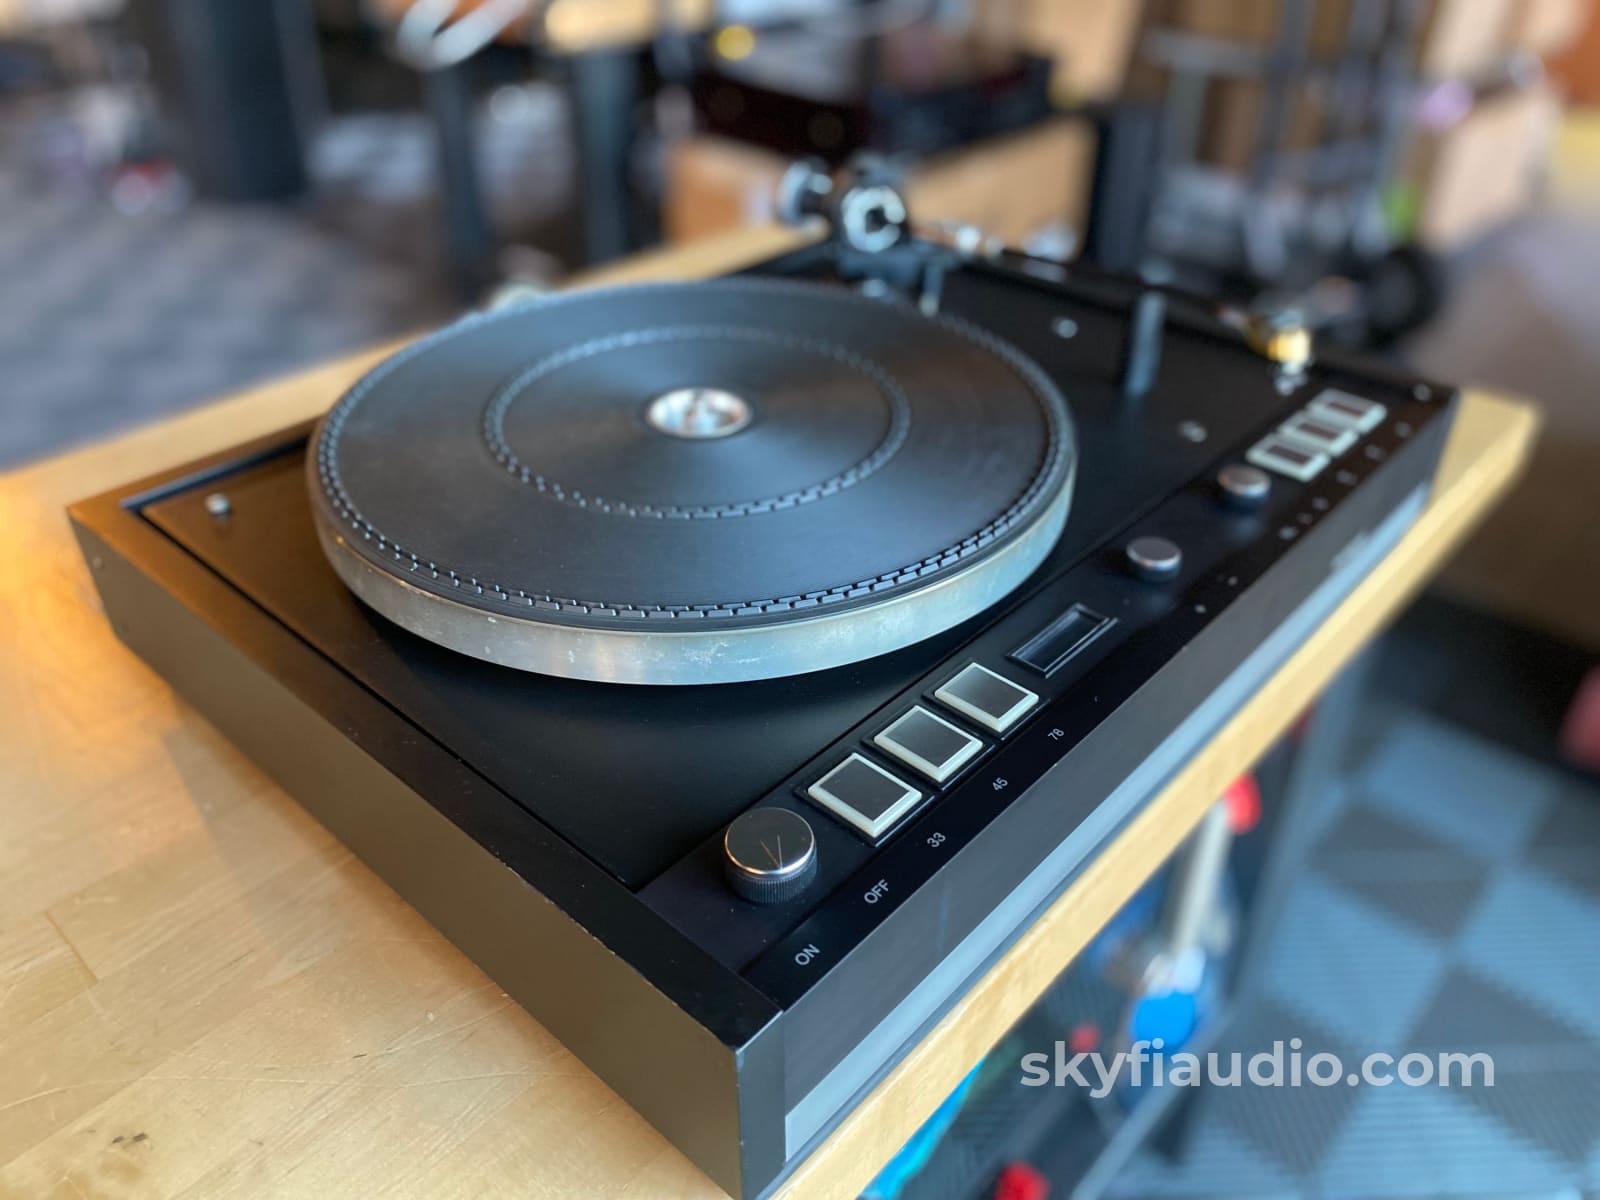 Thorens Td126 Mkii Vintage Turntable With Shure Ultra 500 Cartridge